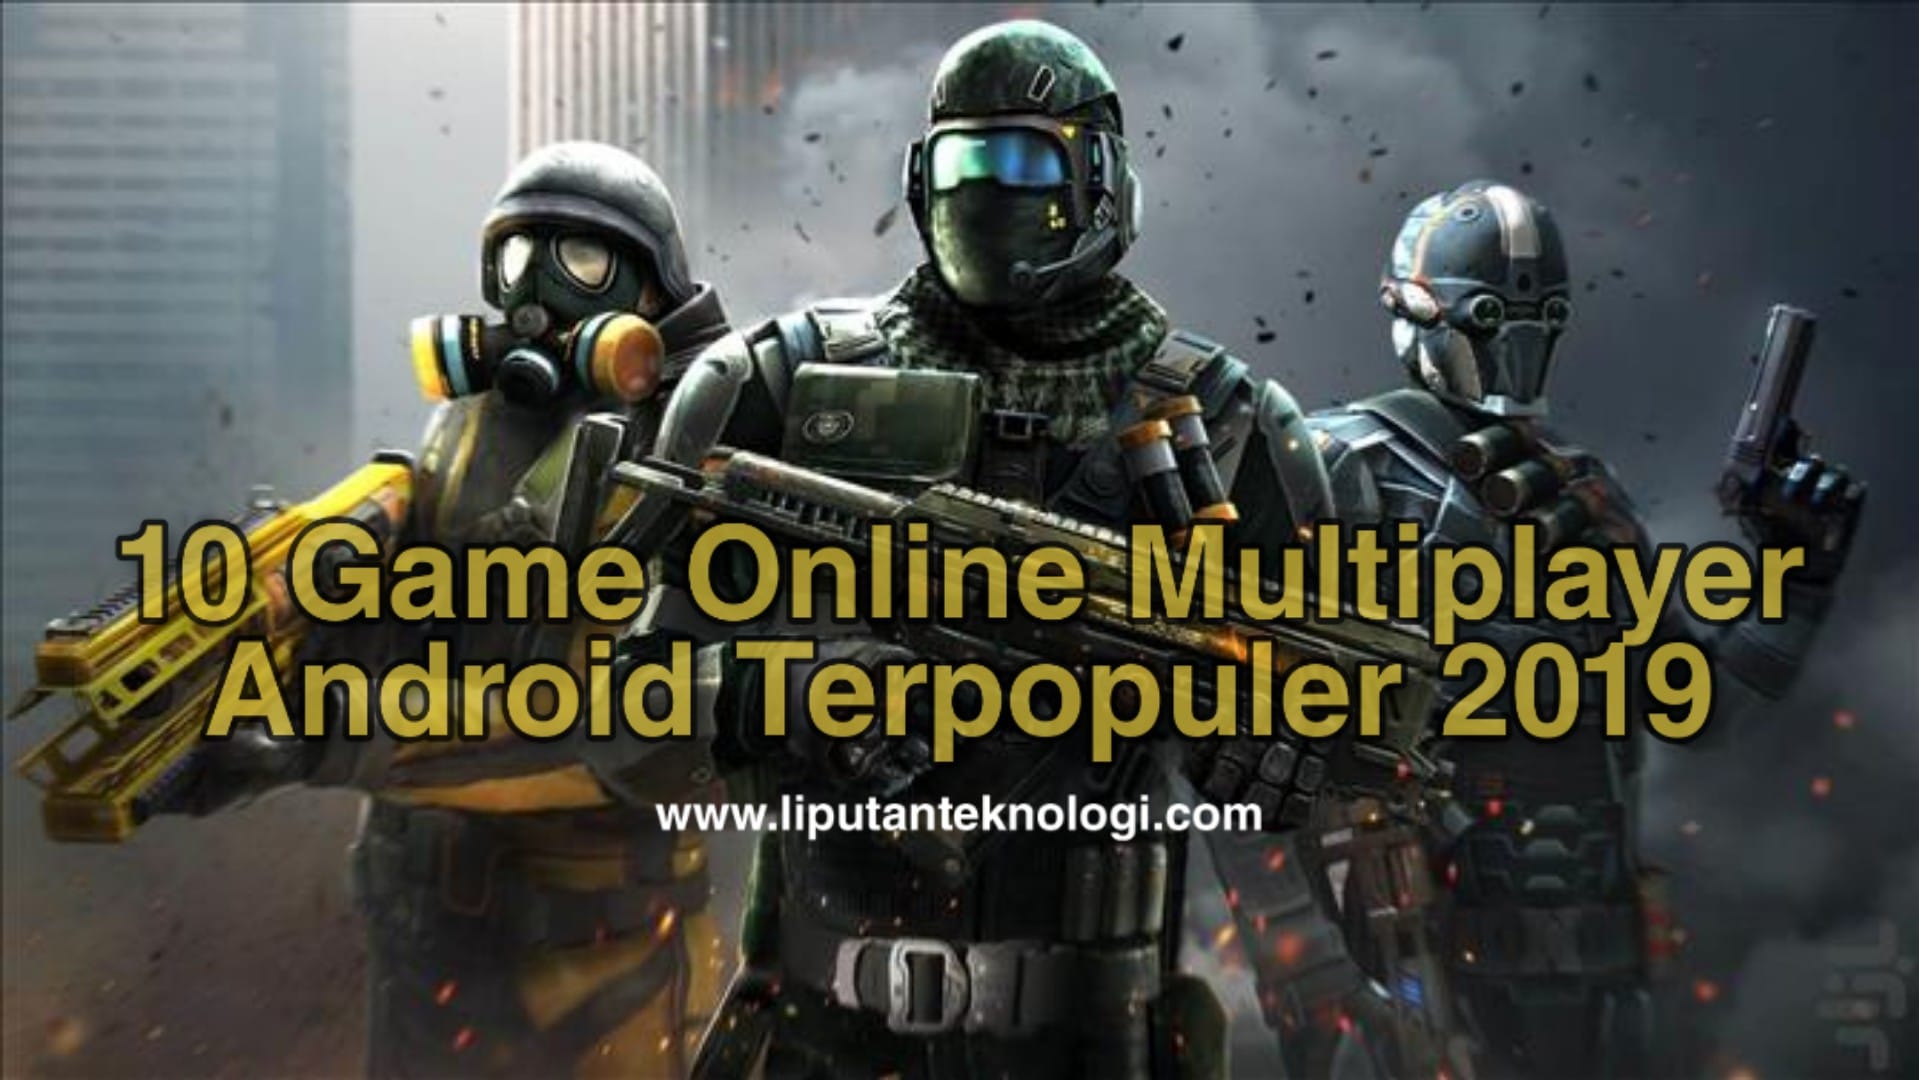 Game Online Multiplayer Android Terpopuler 2020